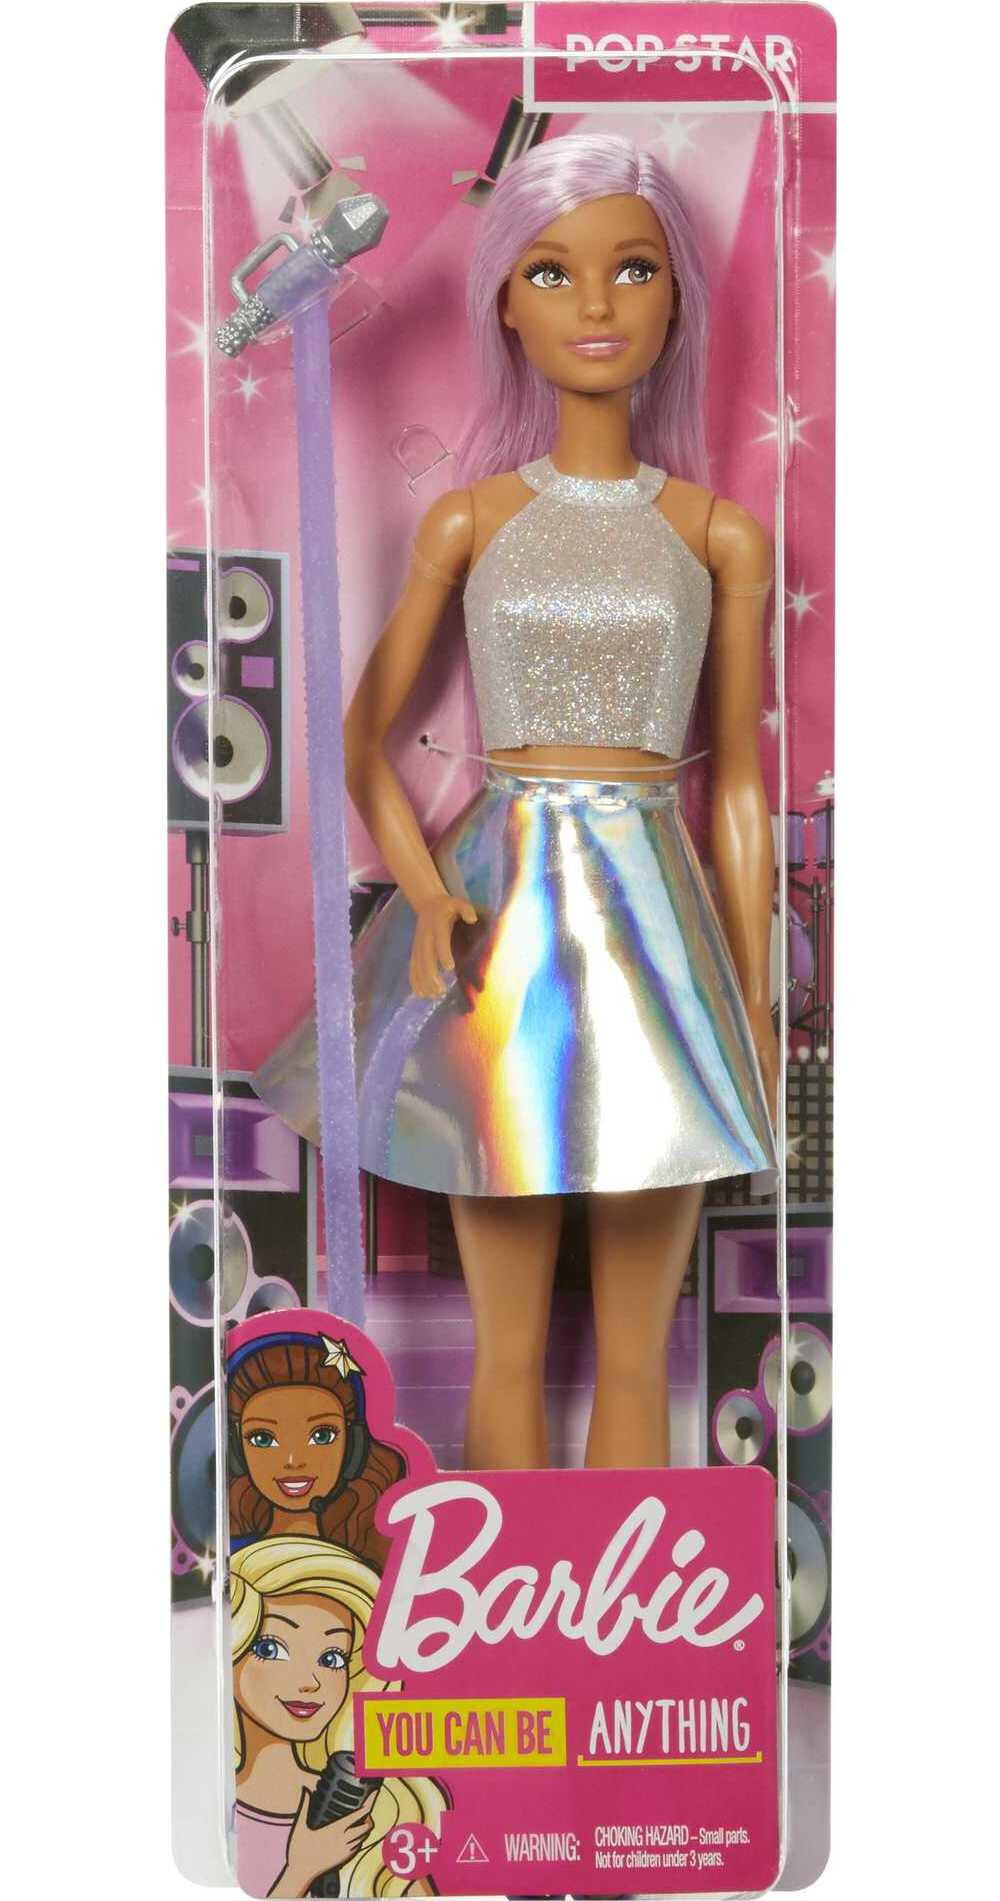 Barbie Pop Star Fashion Doll Dressed in Iridescent Skirt with Pink Hair & Brown Eyes - image 6 of 6